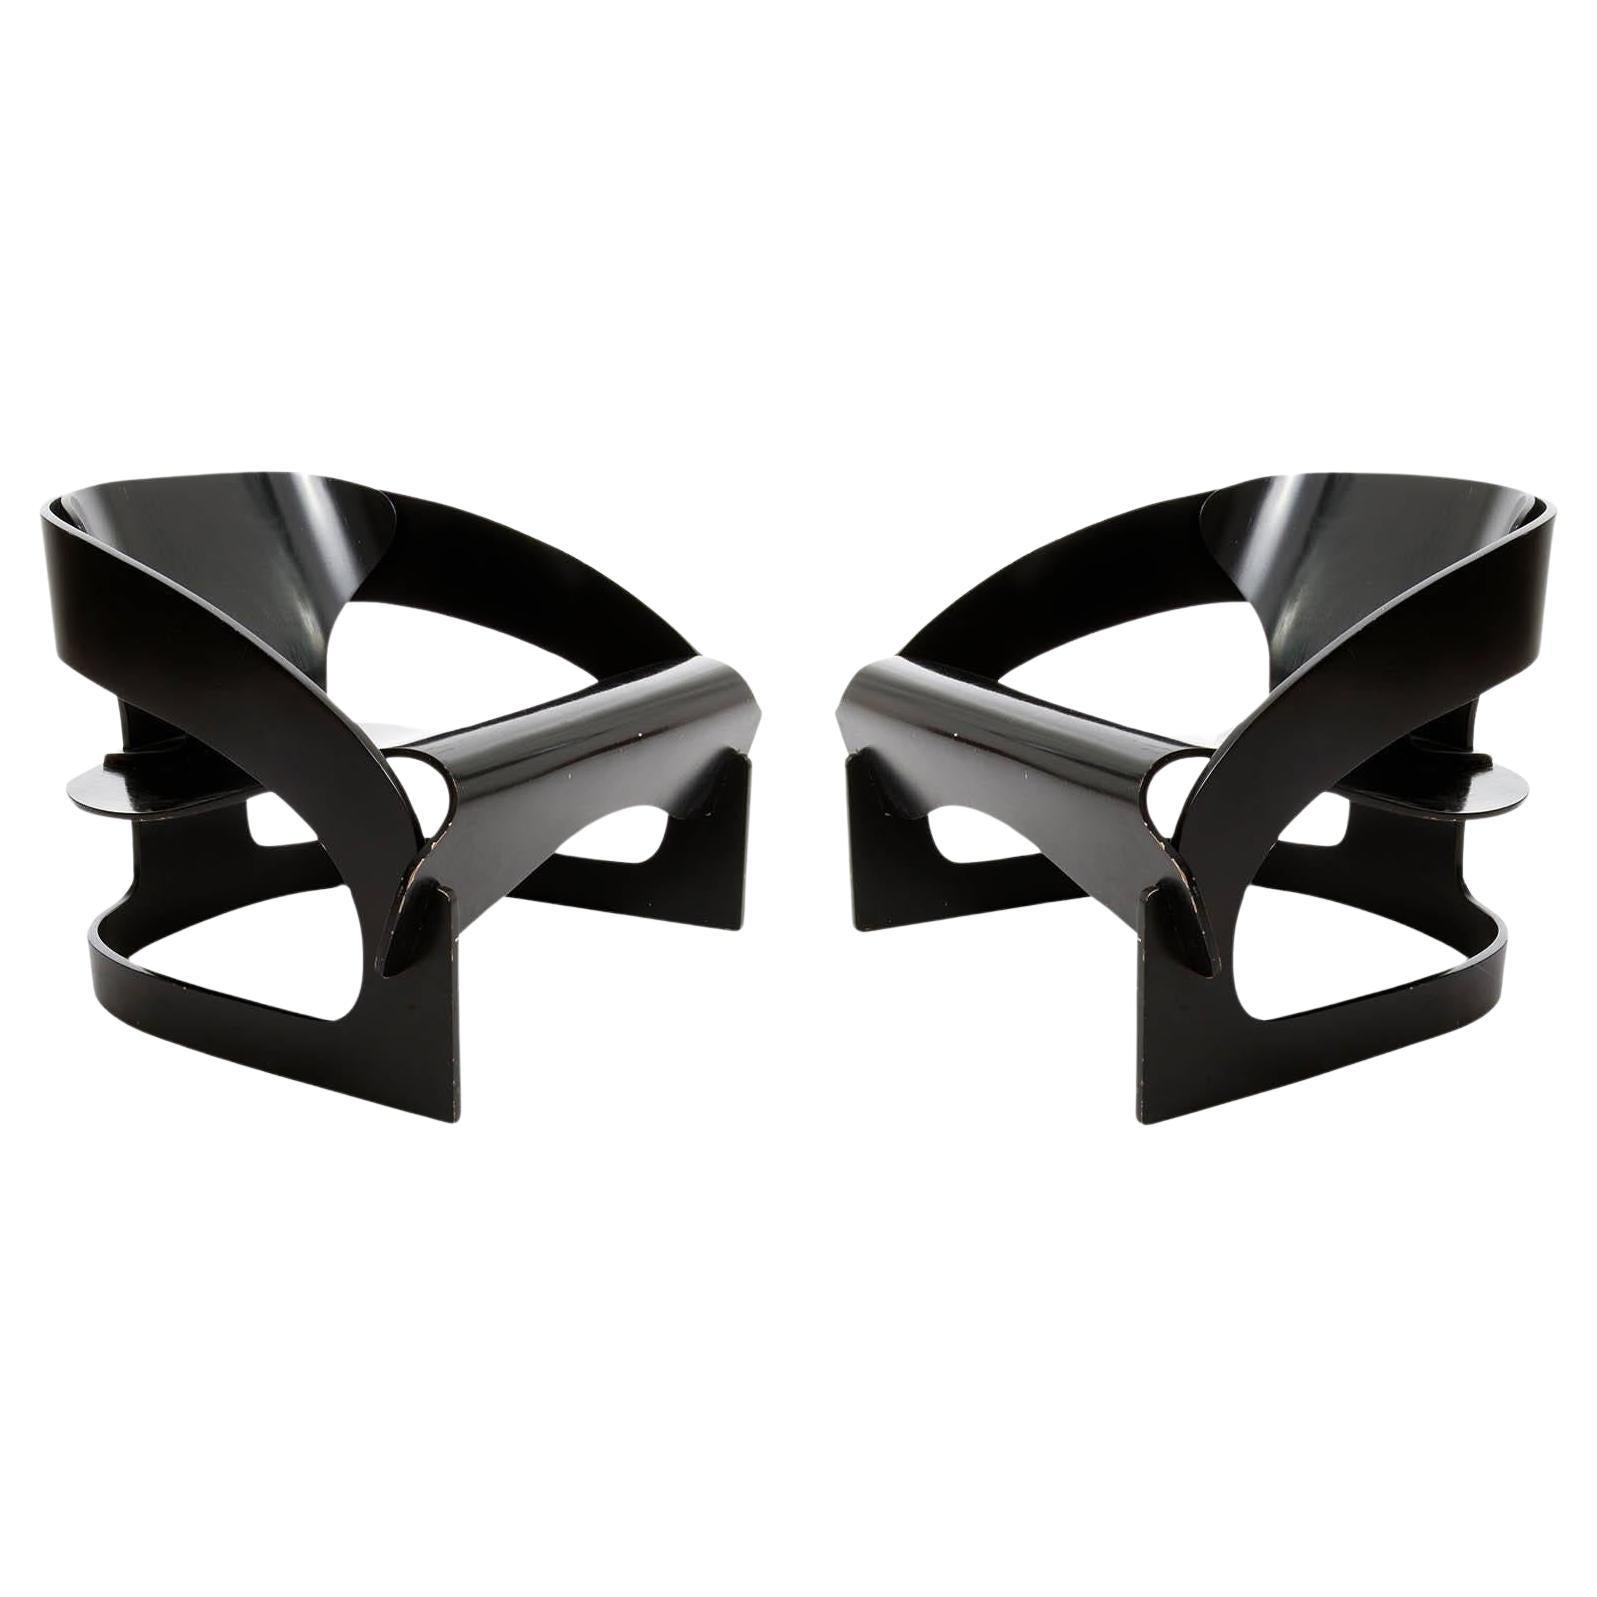 Pair of Joe Colombo Chairs No. 4801, Black Plywood Wood, Kartell, Italy, 1960s